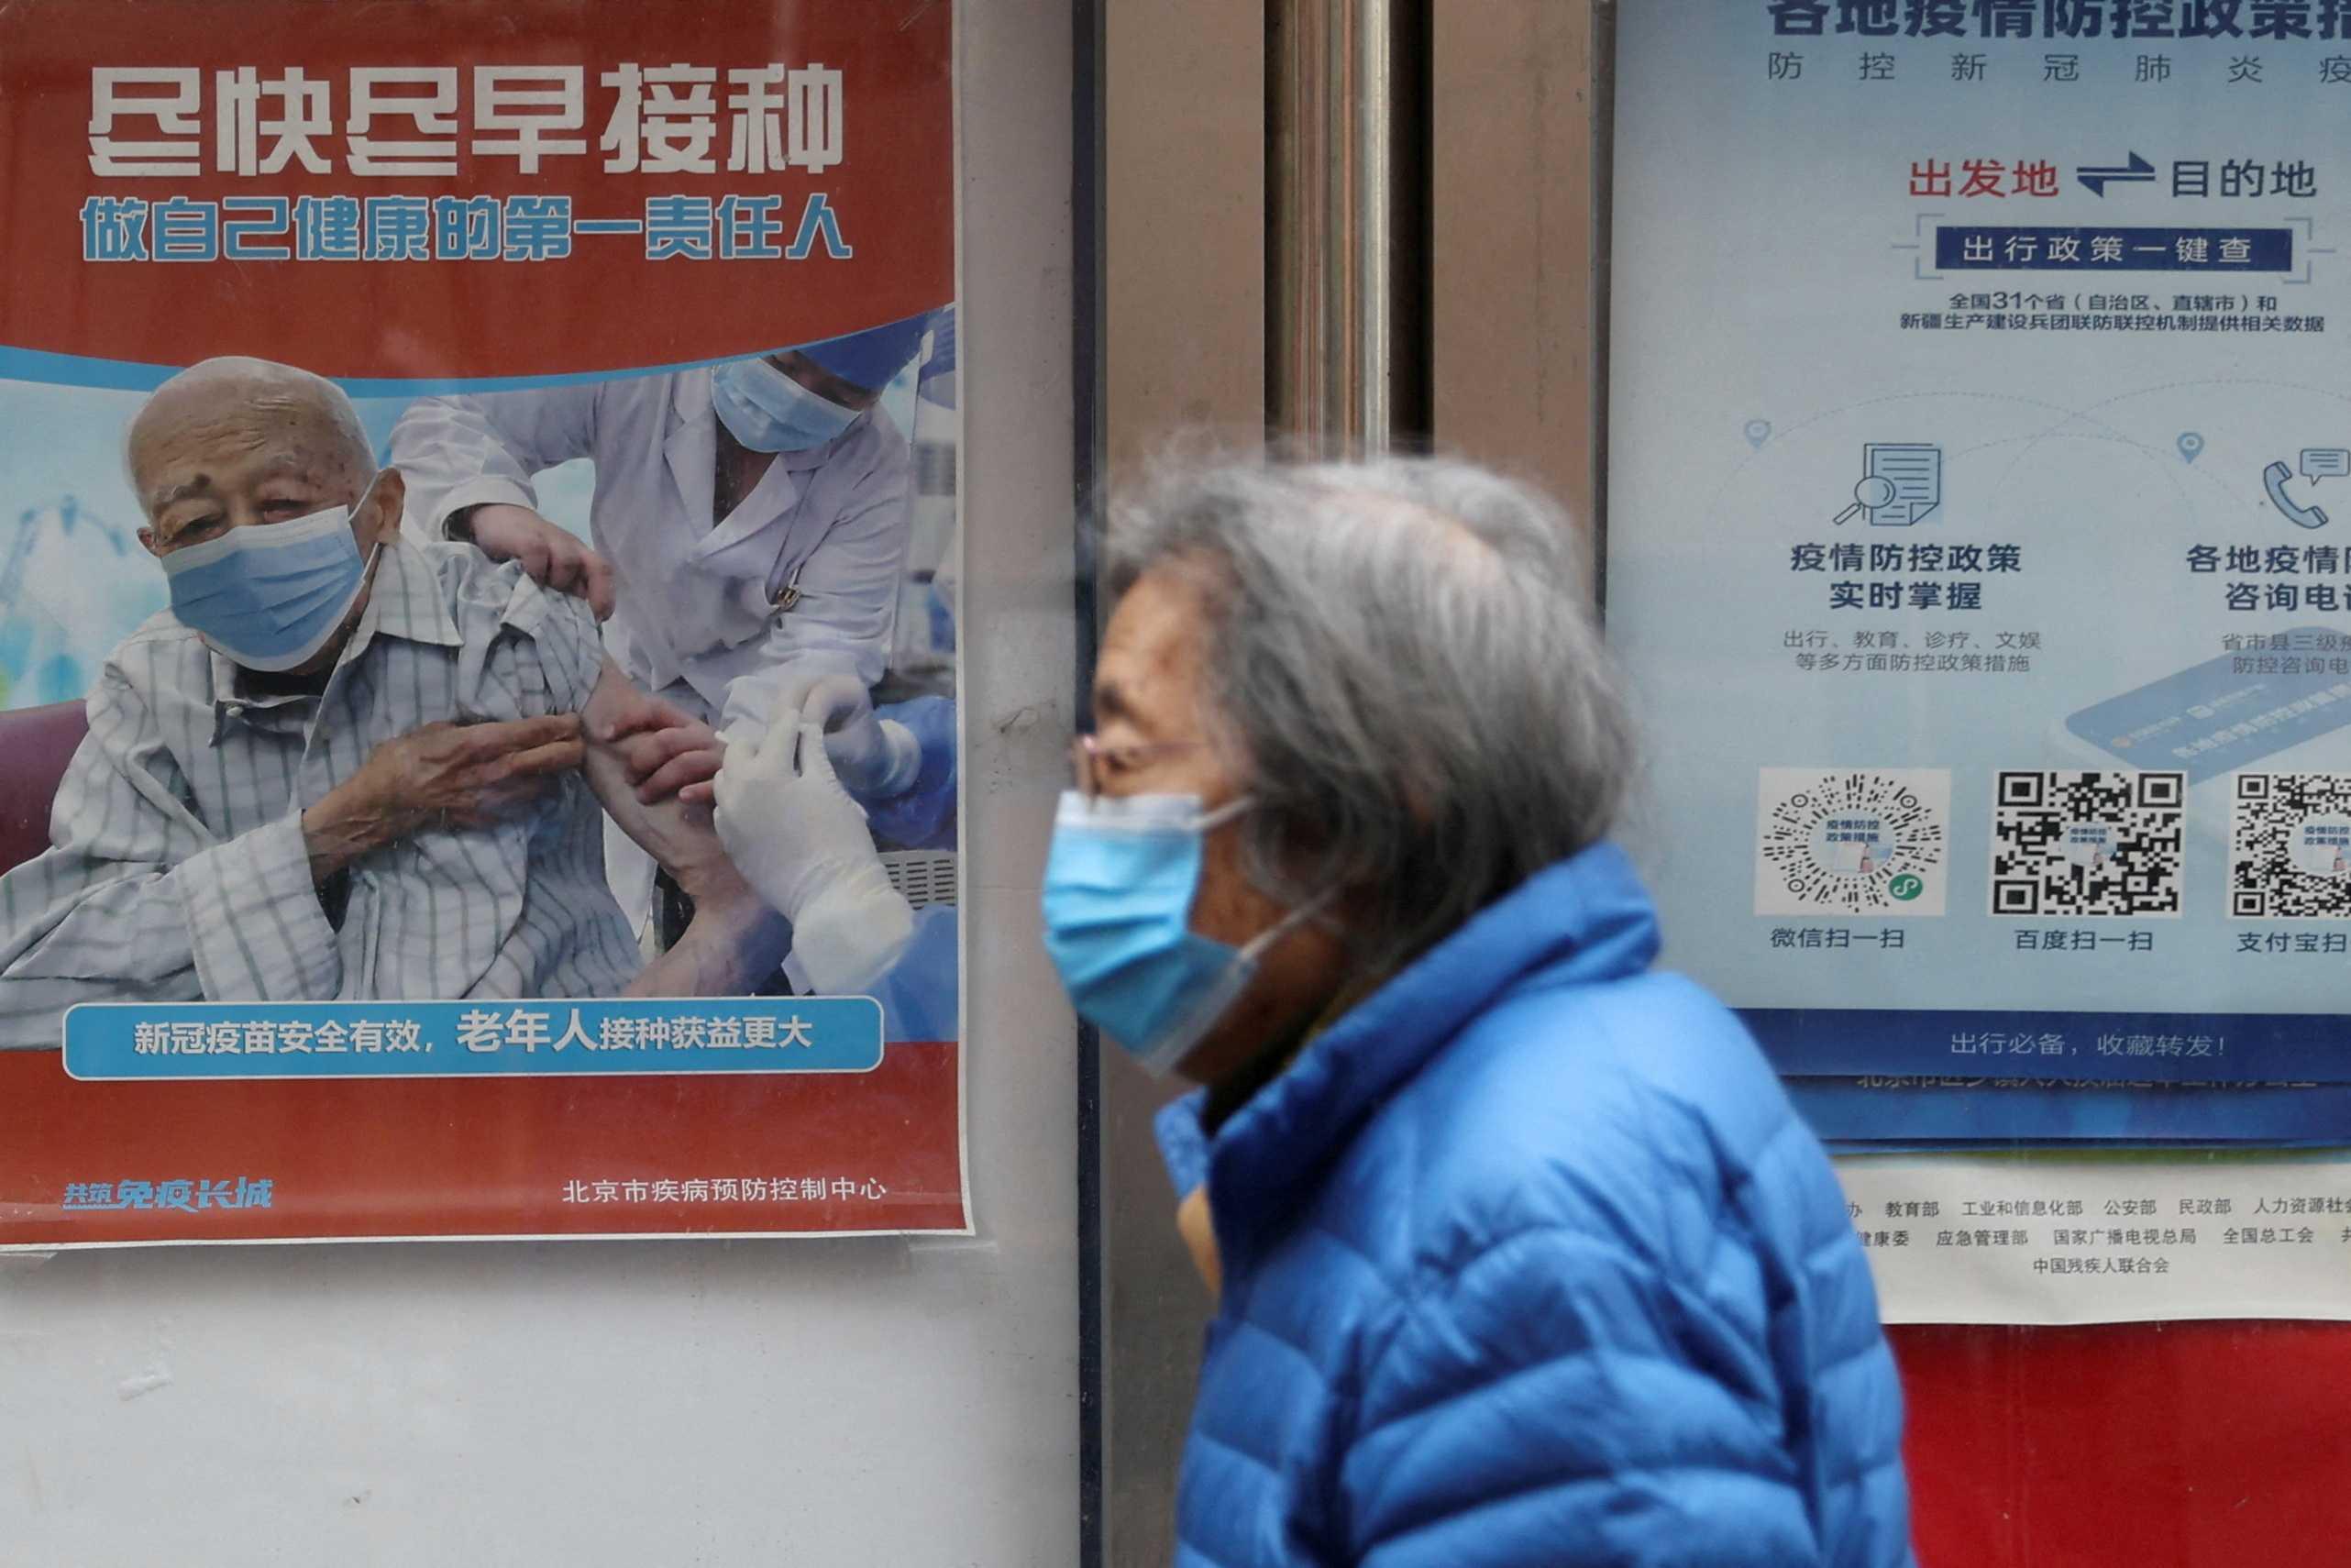 A person walks past a poster encouraging elderly people to get vaccinated against Covid-19, near a residential compound in Beijing, China March 30. Photo: Reuters